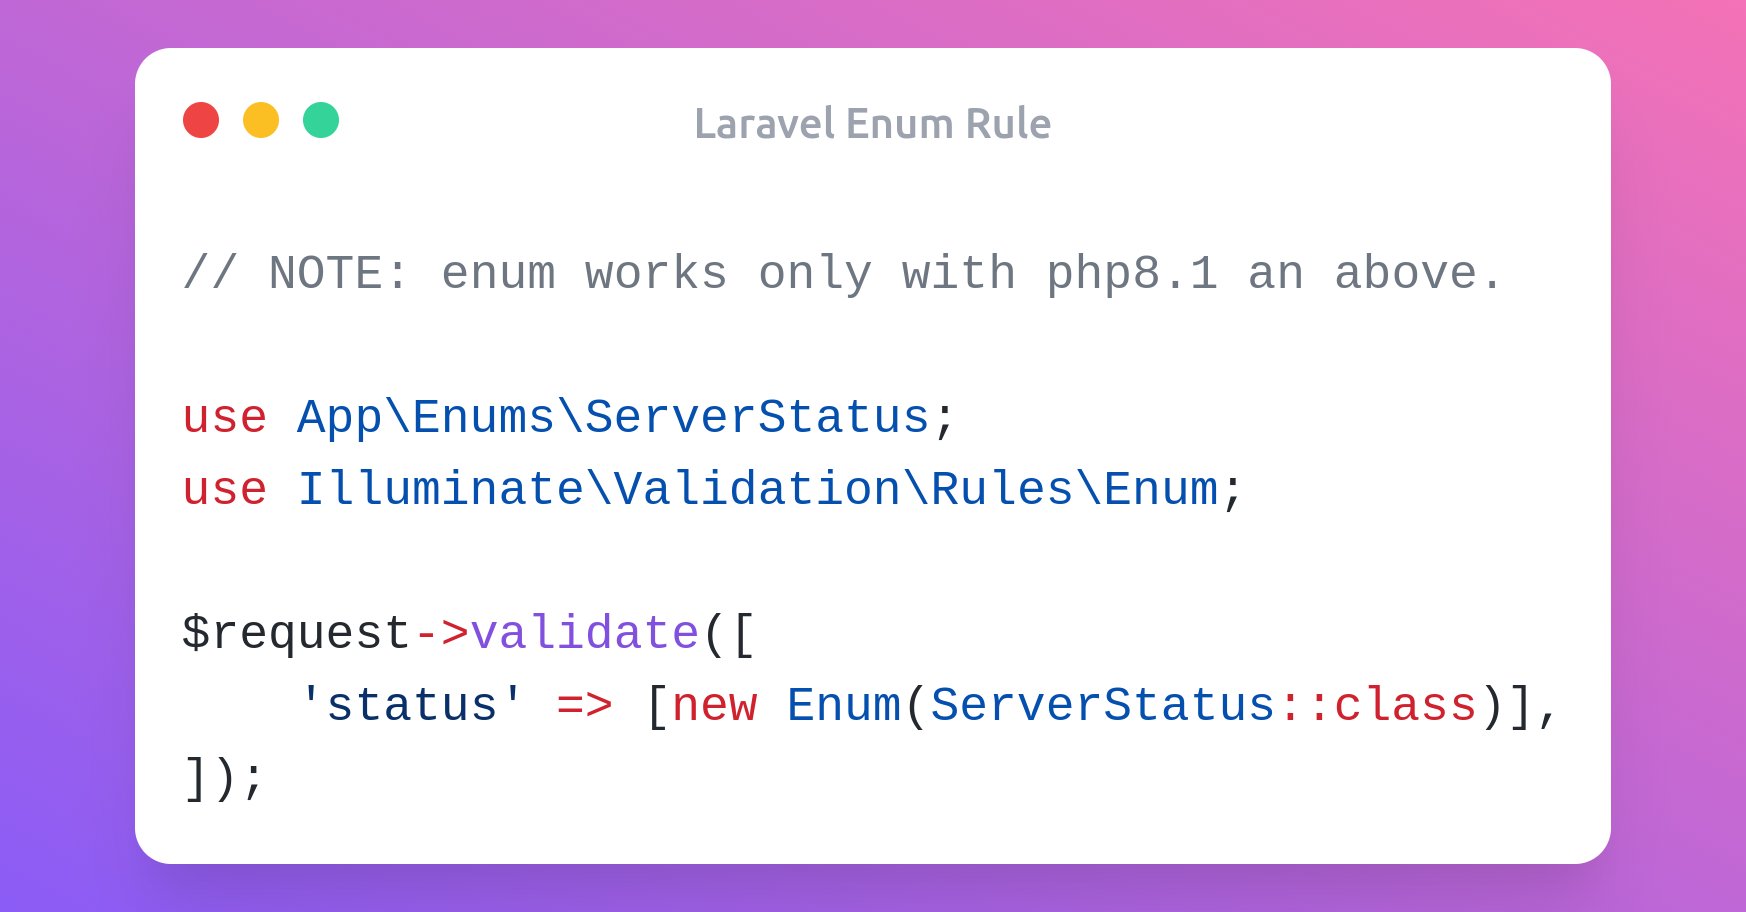 You can validate values for enum database columns using the new Enum validation rule